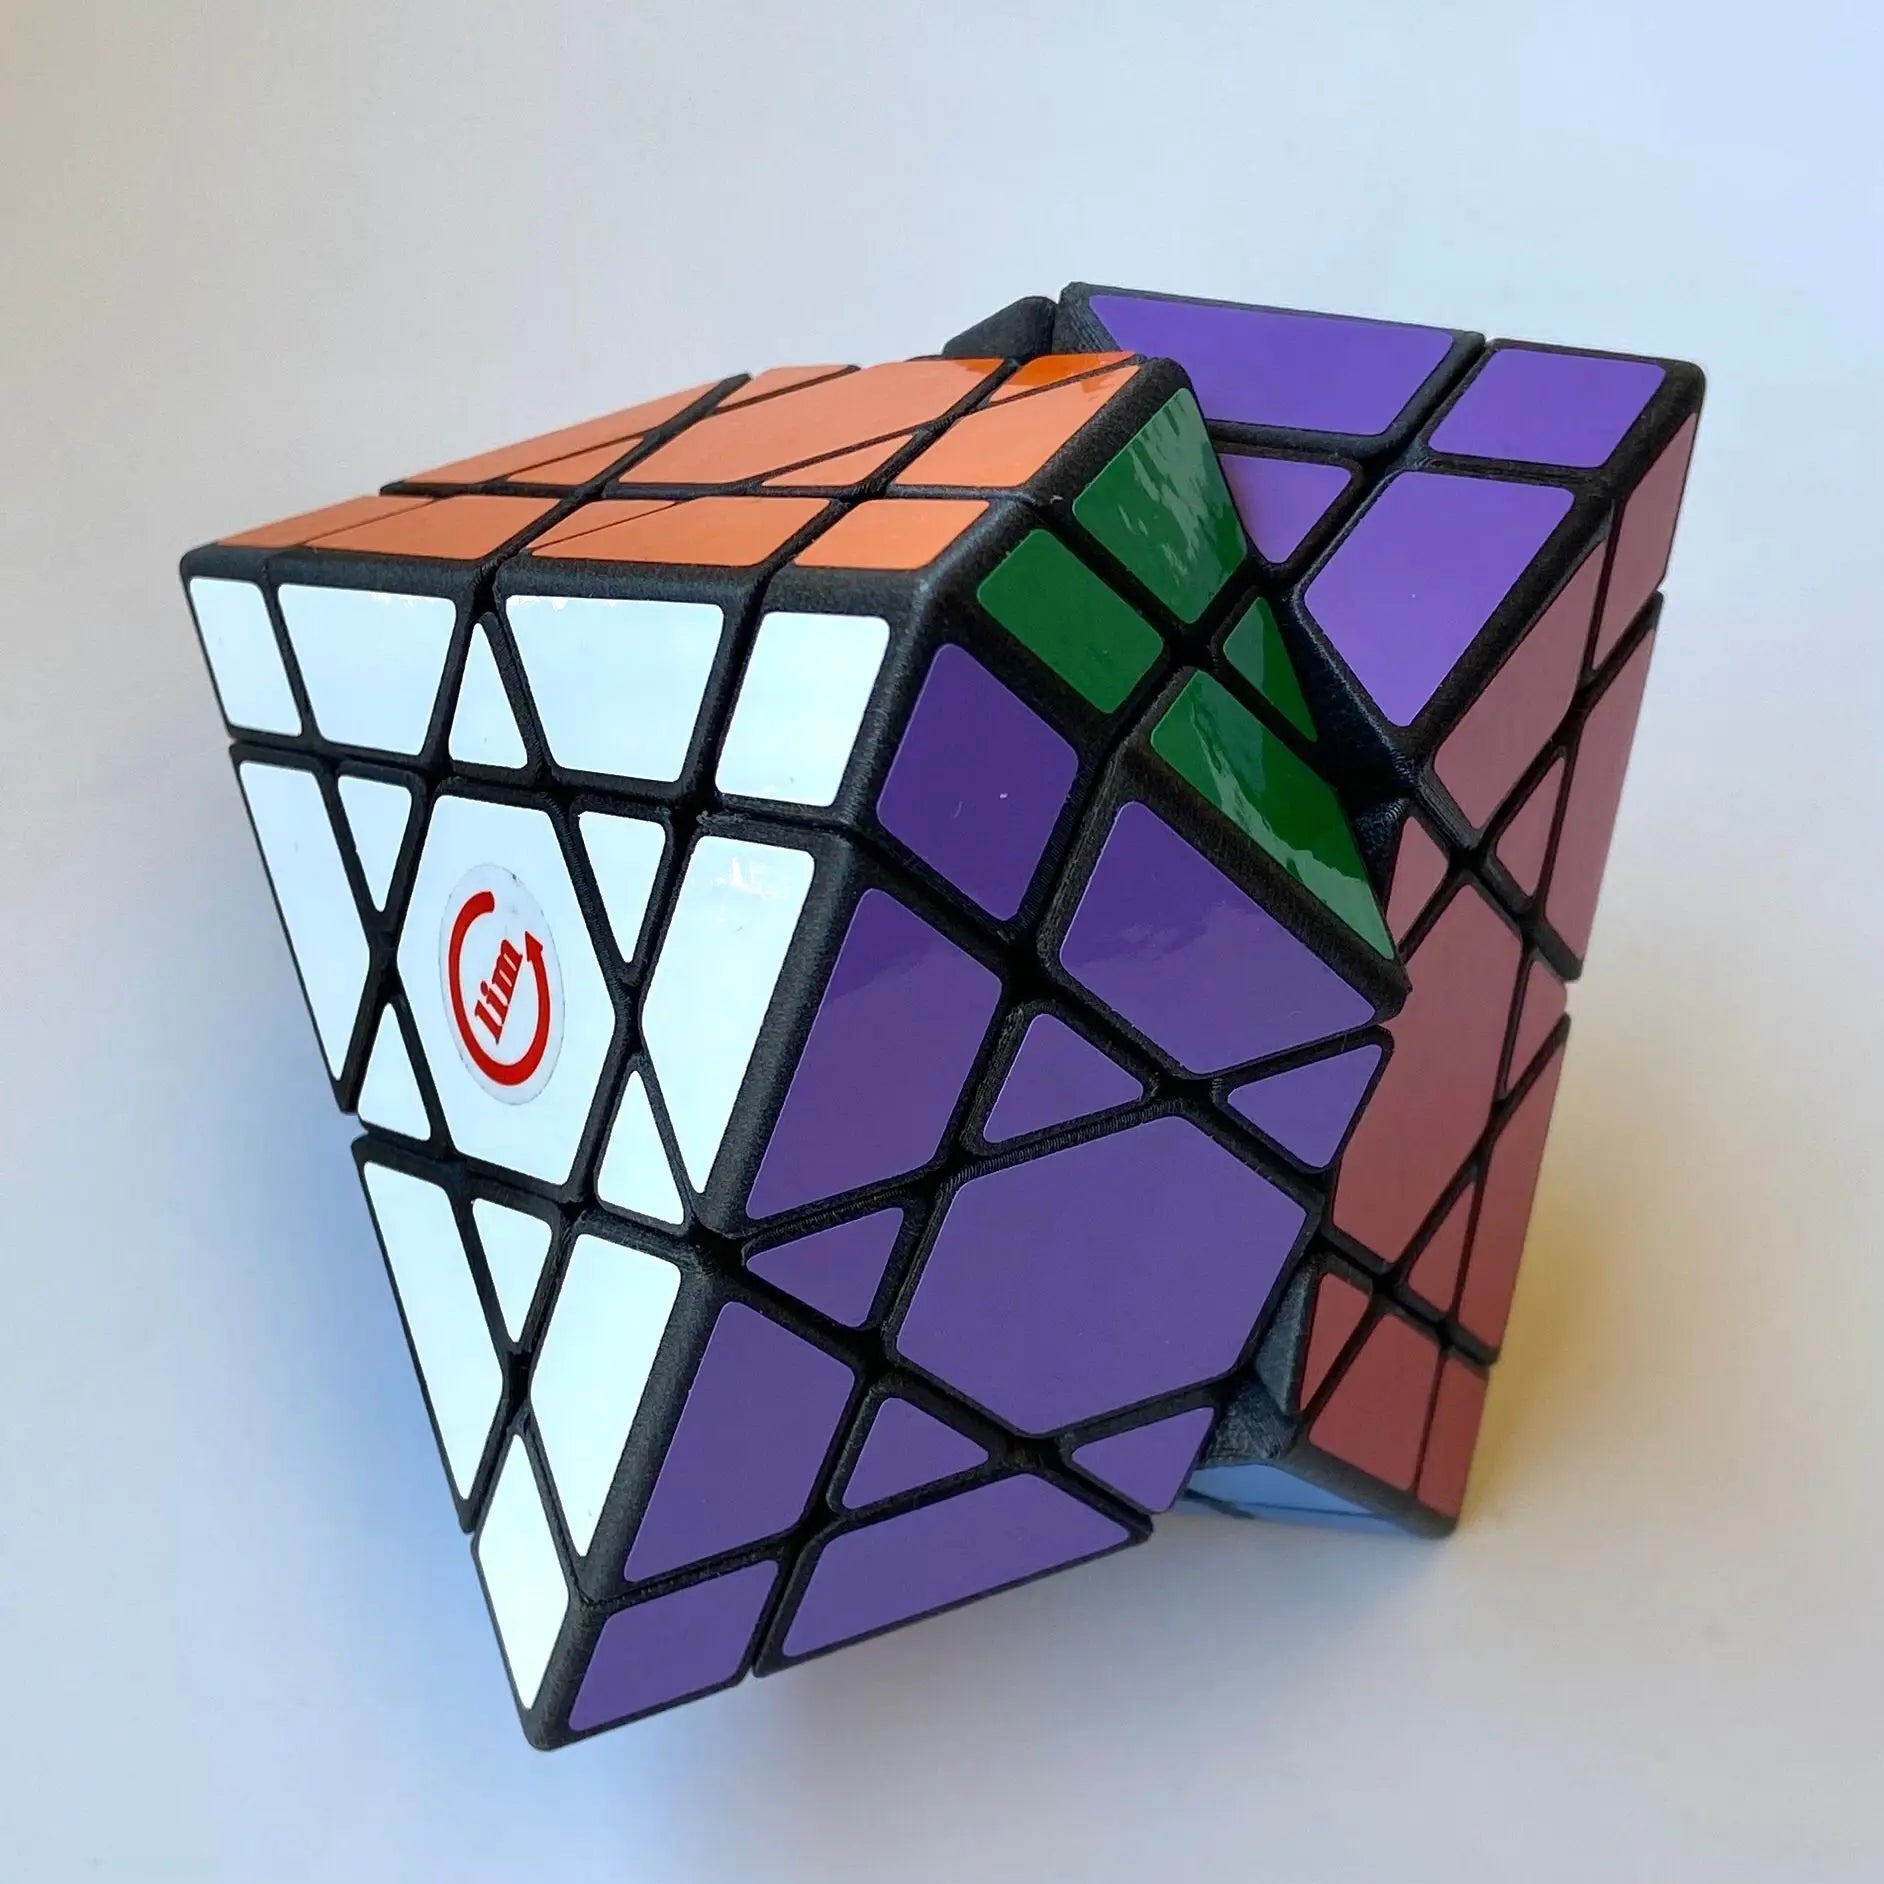 3D Printed Limcube Hexagram Octahedron Puzzle - CubeIn